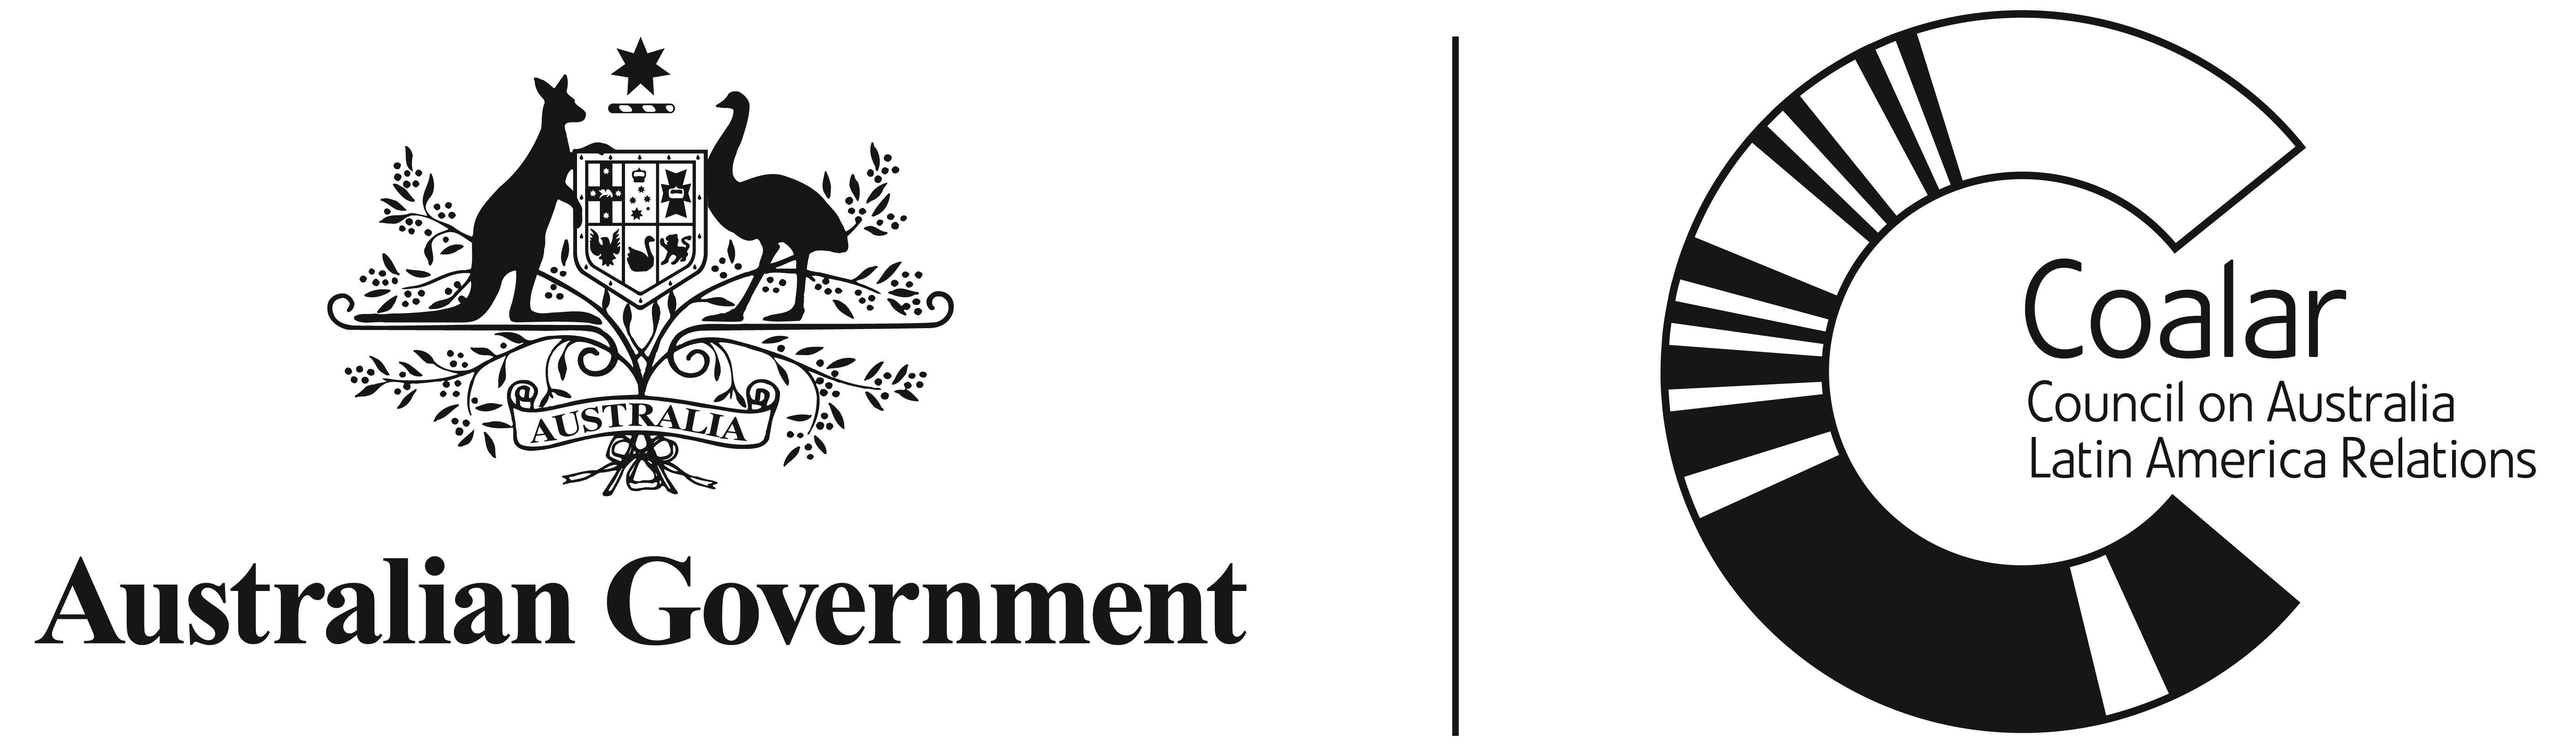 Dfat Logo - Logos - Department of Foreign Affairs and Trade